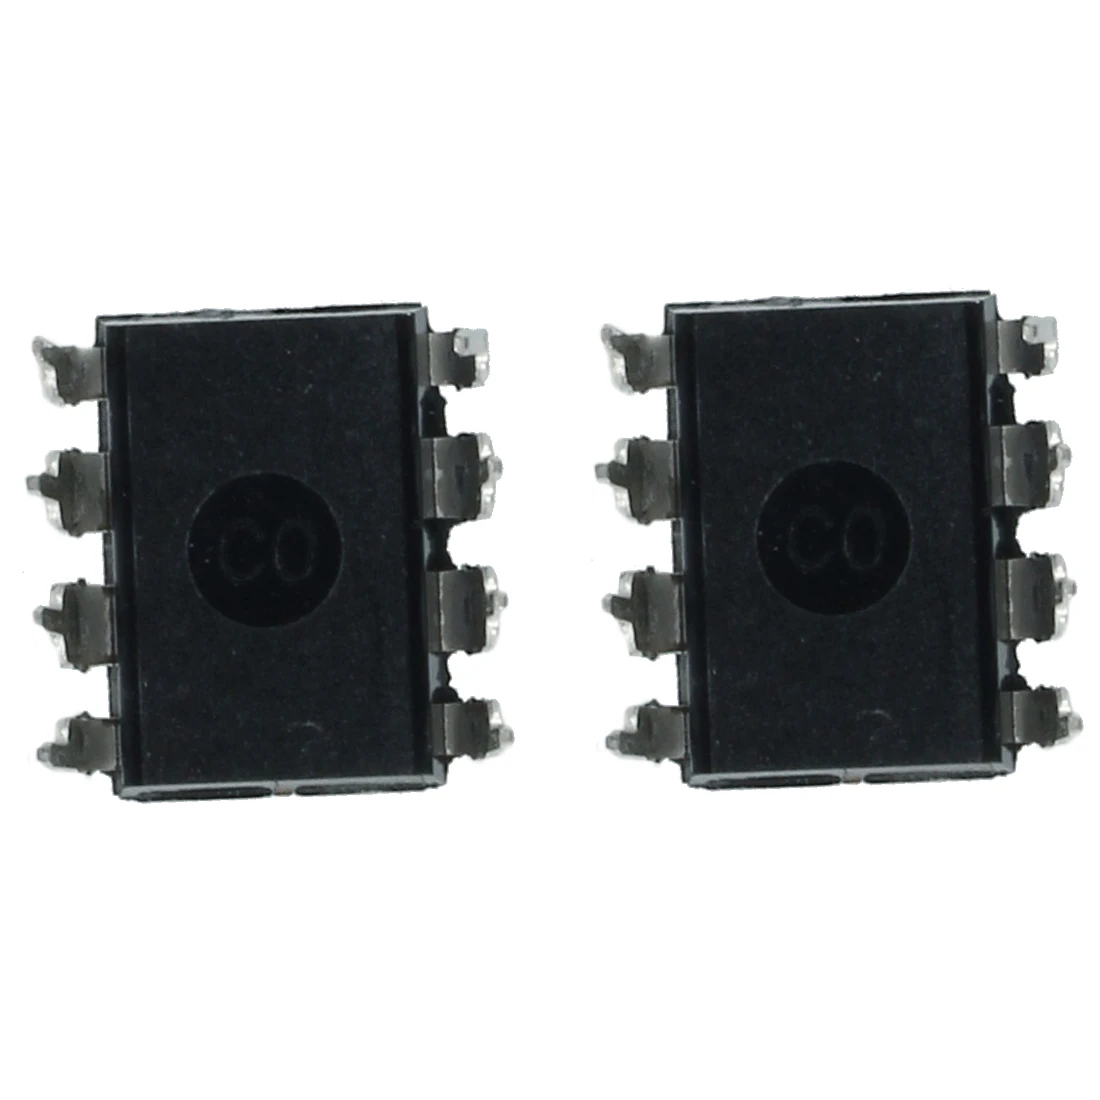  10x LM358N Low Power 8-Pin Dual Operational Amplifier